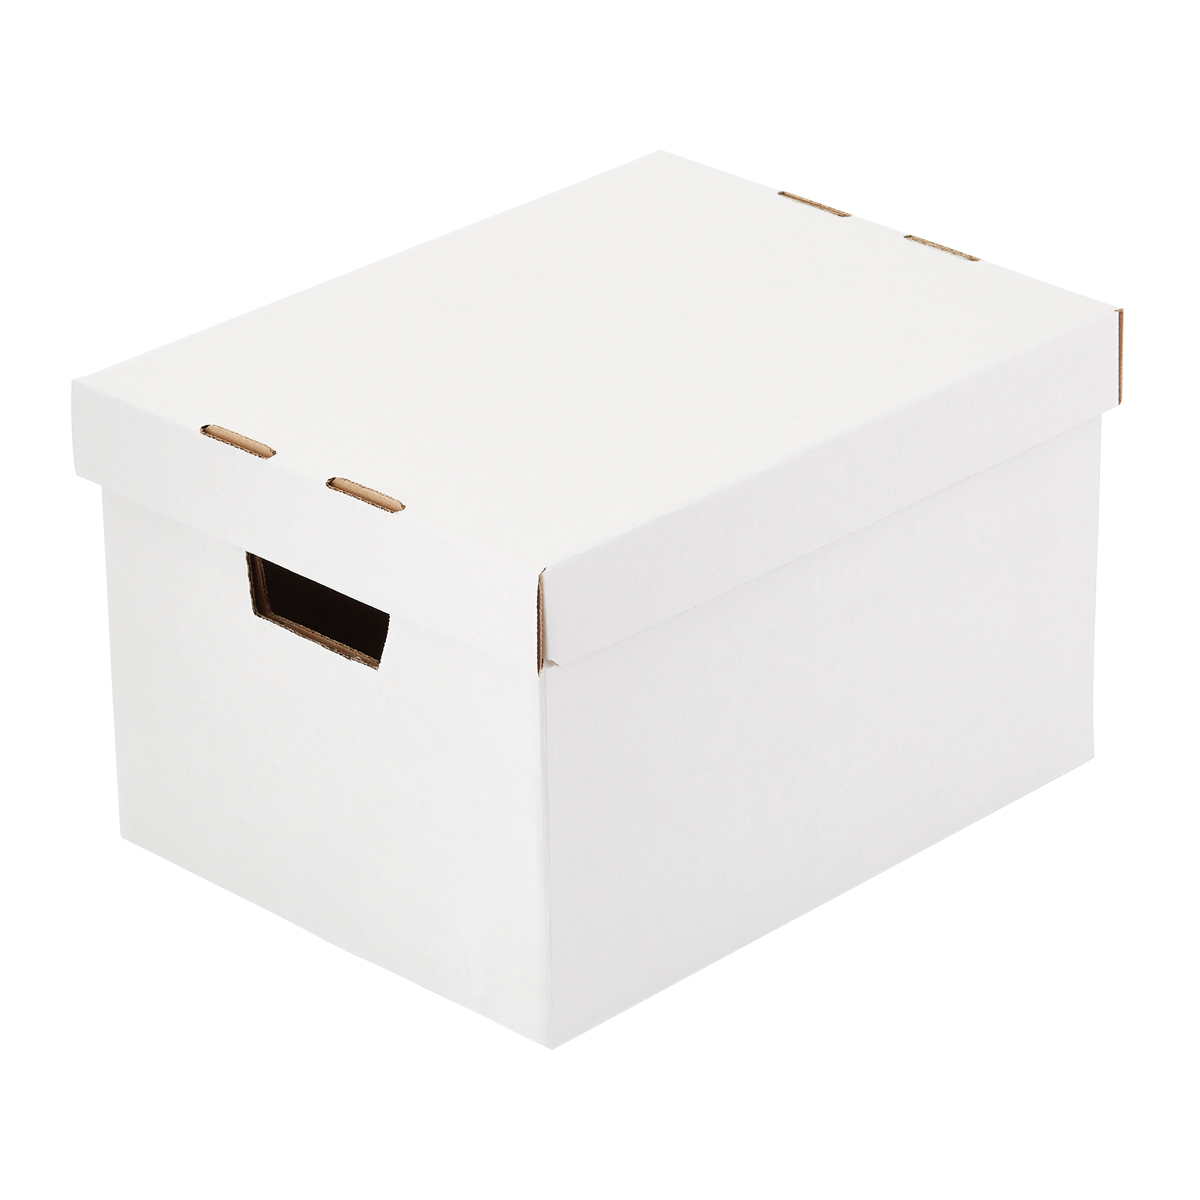 https://www.containerstore.com/catalogimages/281381/SO_OurBestBox_1200x1200.jpg